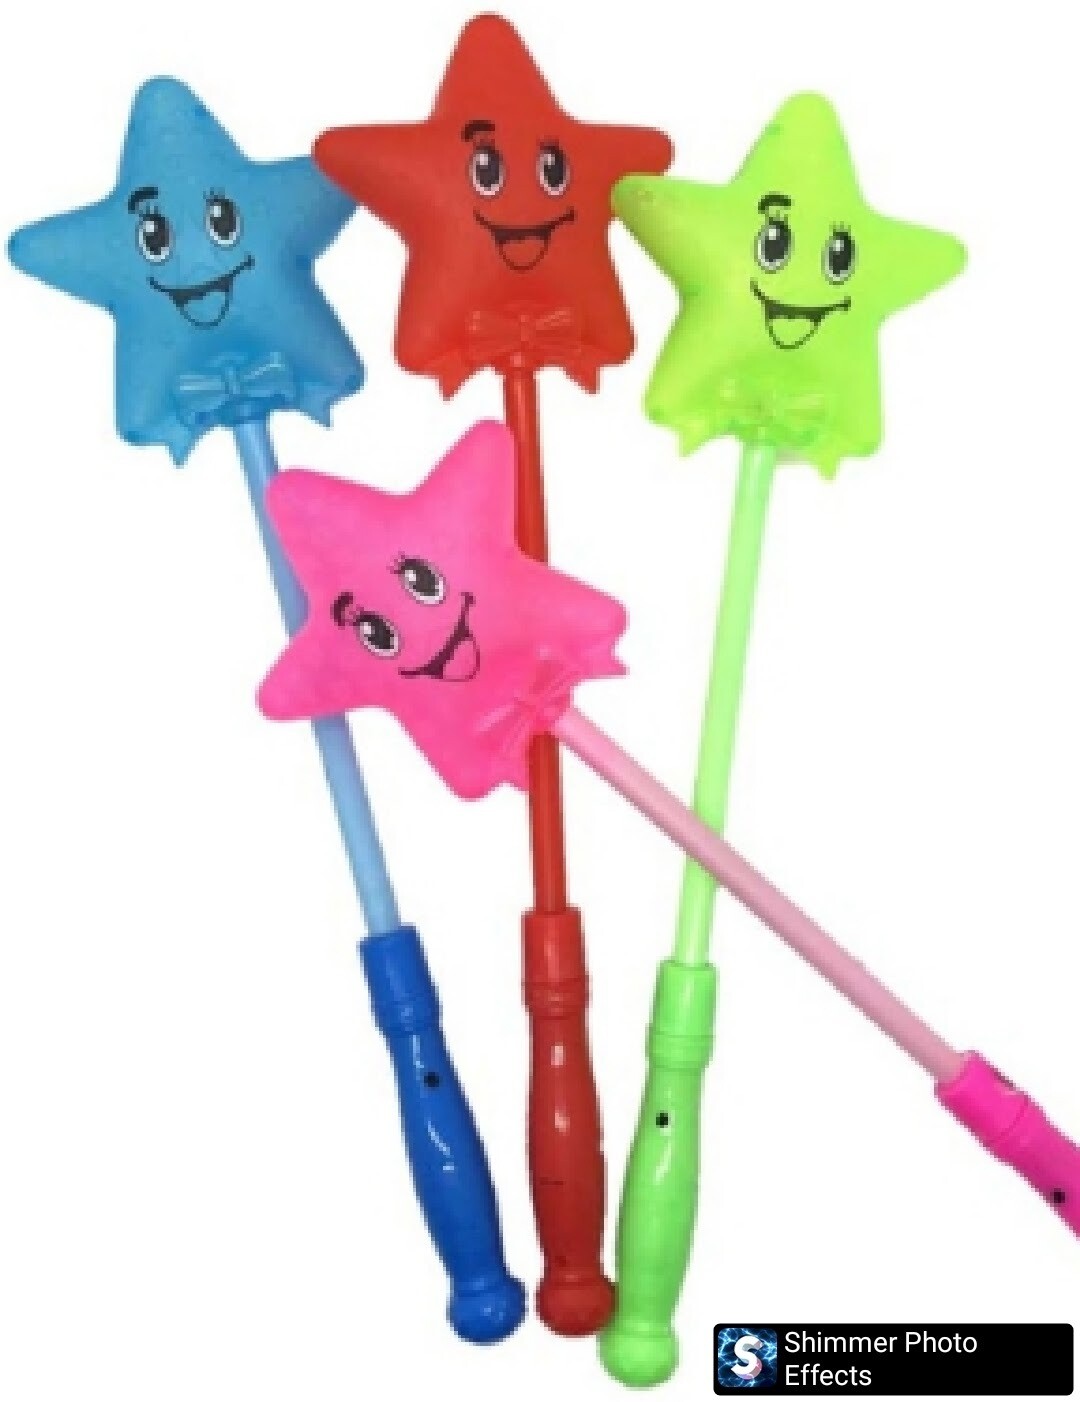 LED: "Star Wands"